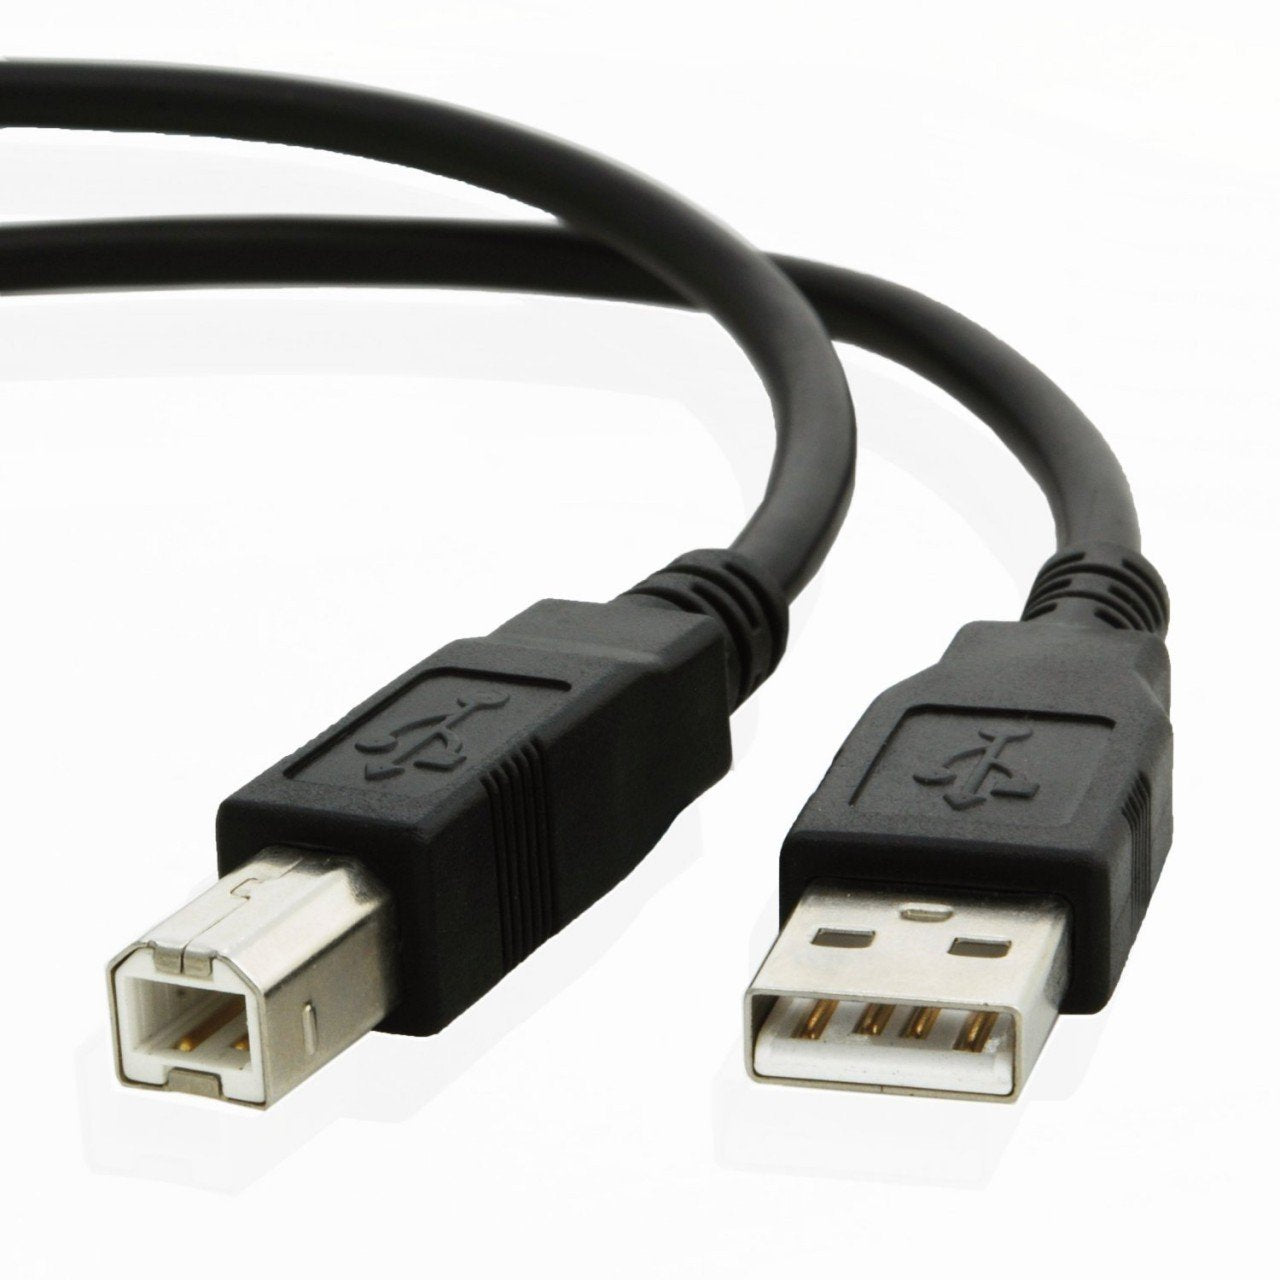 USB cable for Canon PIXMA MG6821